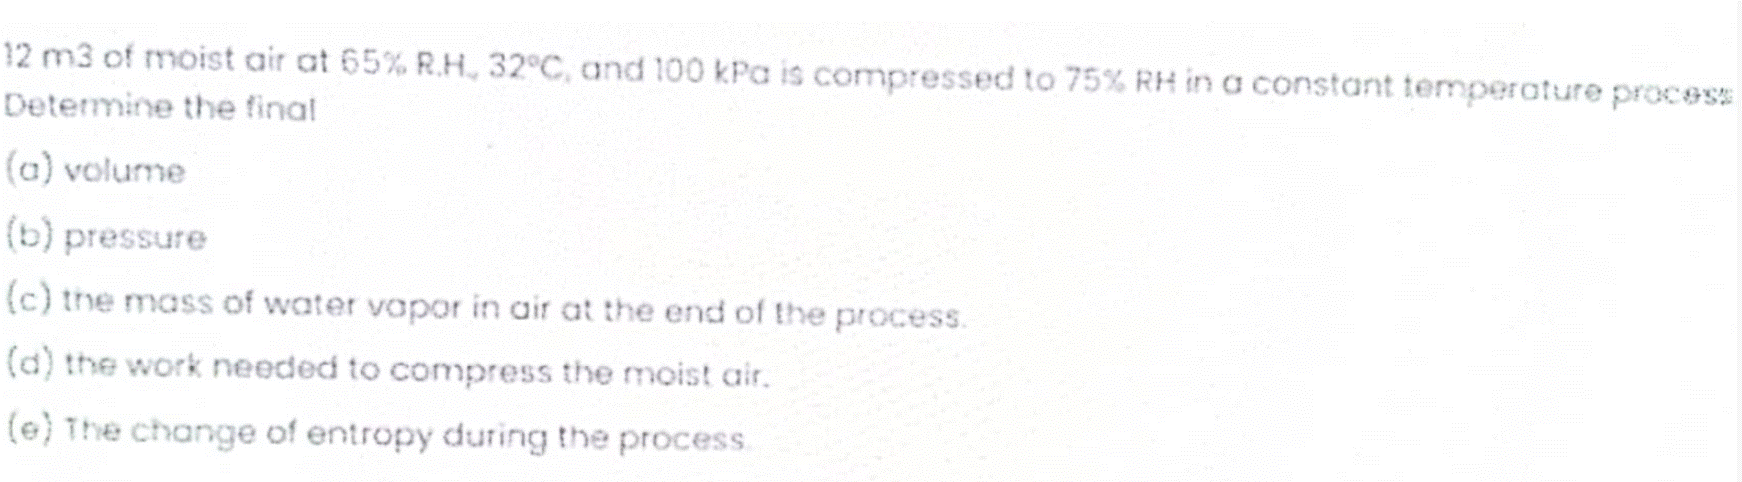 12 m3 of moist air at 65% R.H., 32°C, and 100 kPa is compressed to 75% RH in a constant temperature process
Determine the final
(a) volume
(b) pressure
(c) the mass of water vapor in air at the end of the process.
(a) the work needed to compress the moist air.
(e) The change of entropy during the process.
